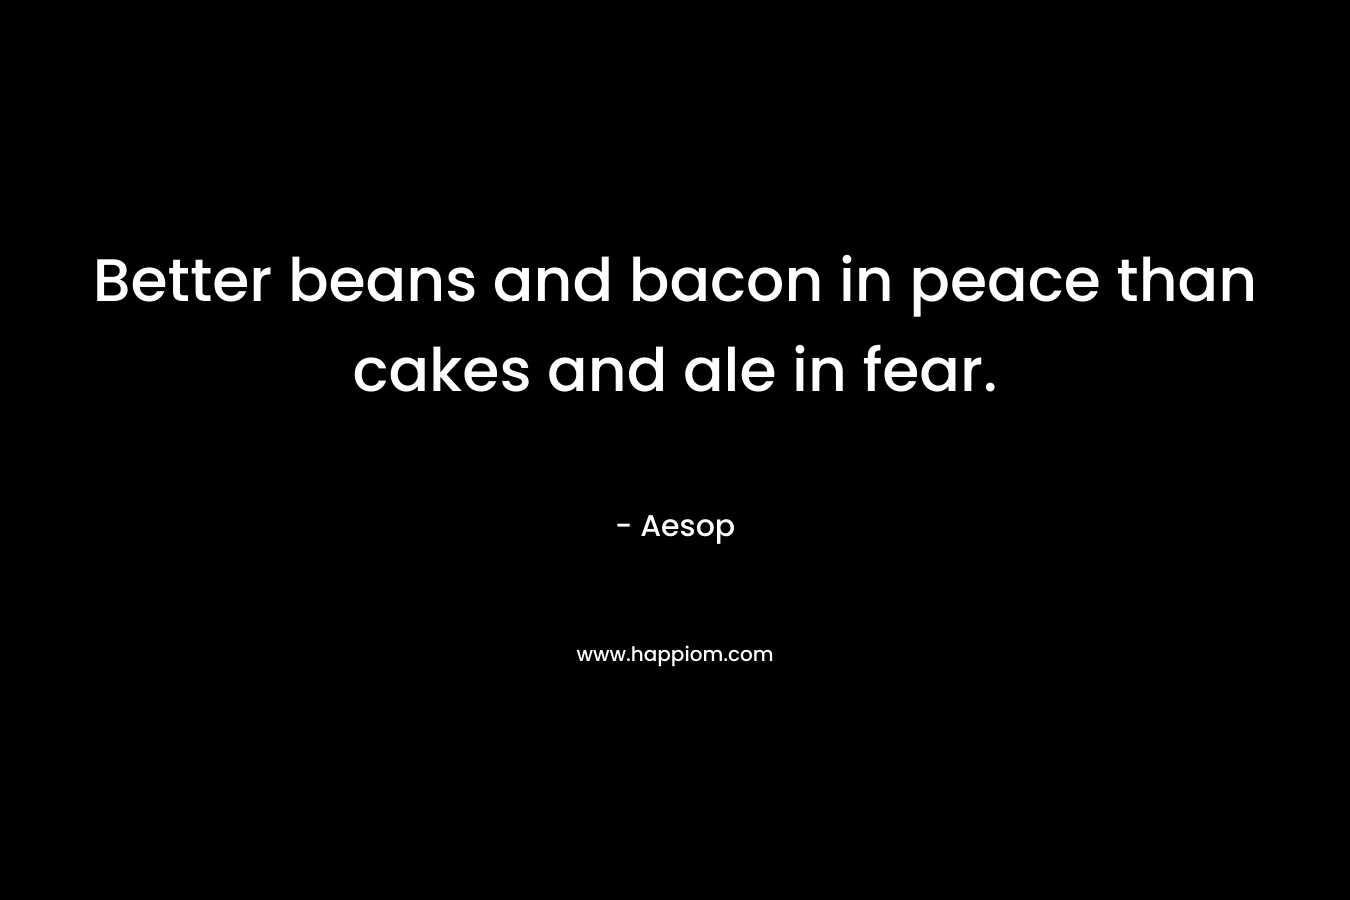 Better beans and bacon in peace than cakes and ale in fear. – Aesop